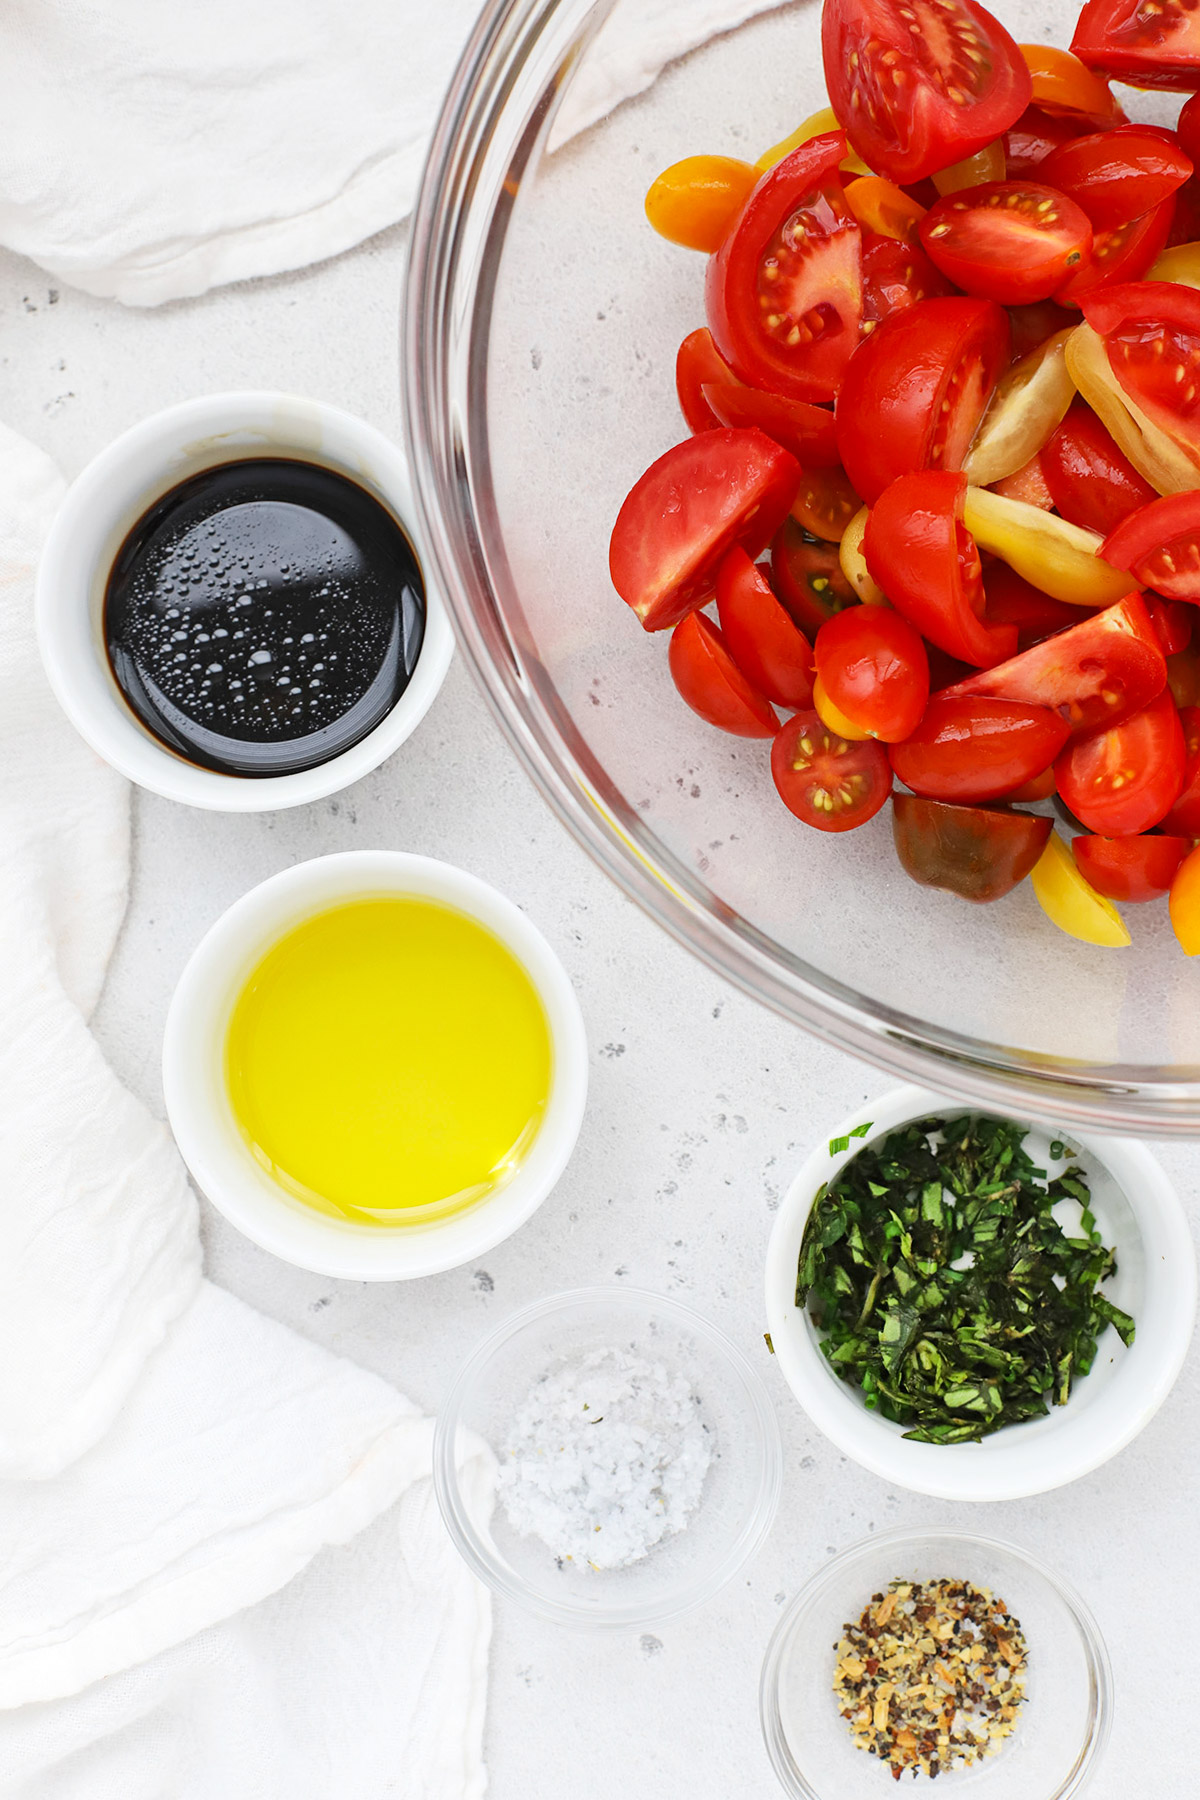 Ingredients for balsamic marinated tomato salad